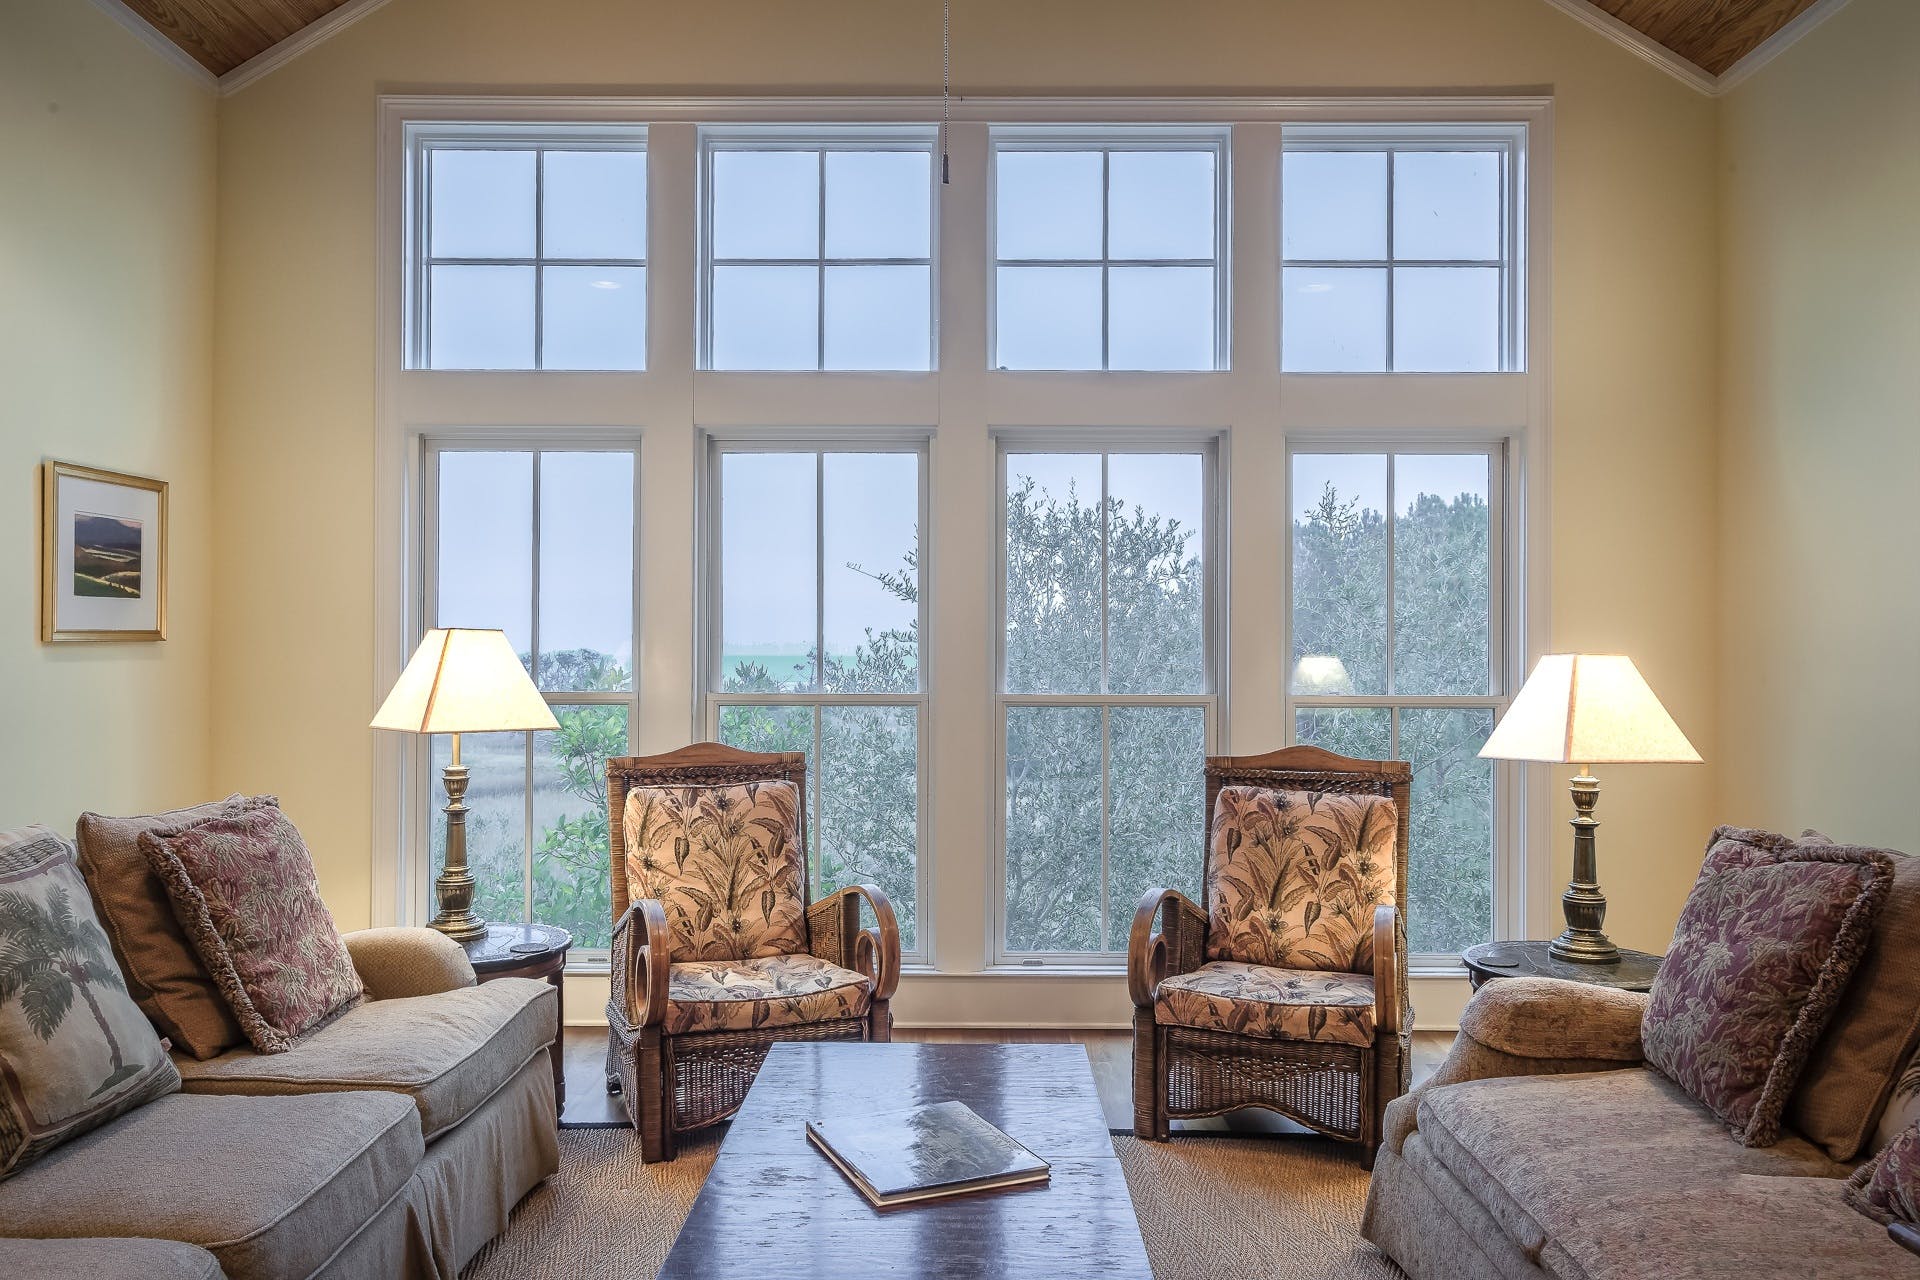 The Benefits of Solar Shades for Windows